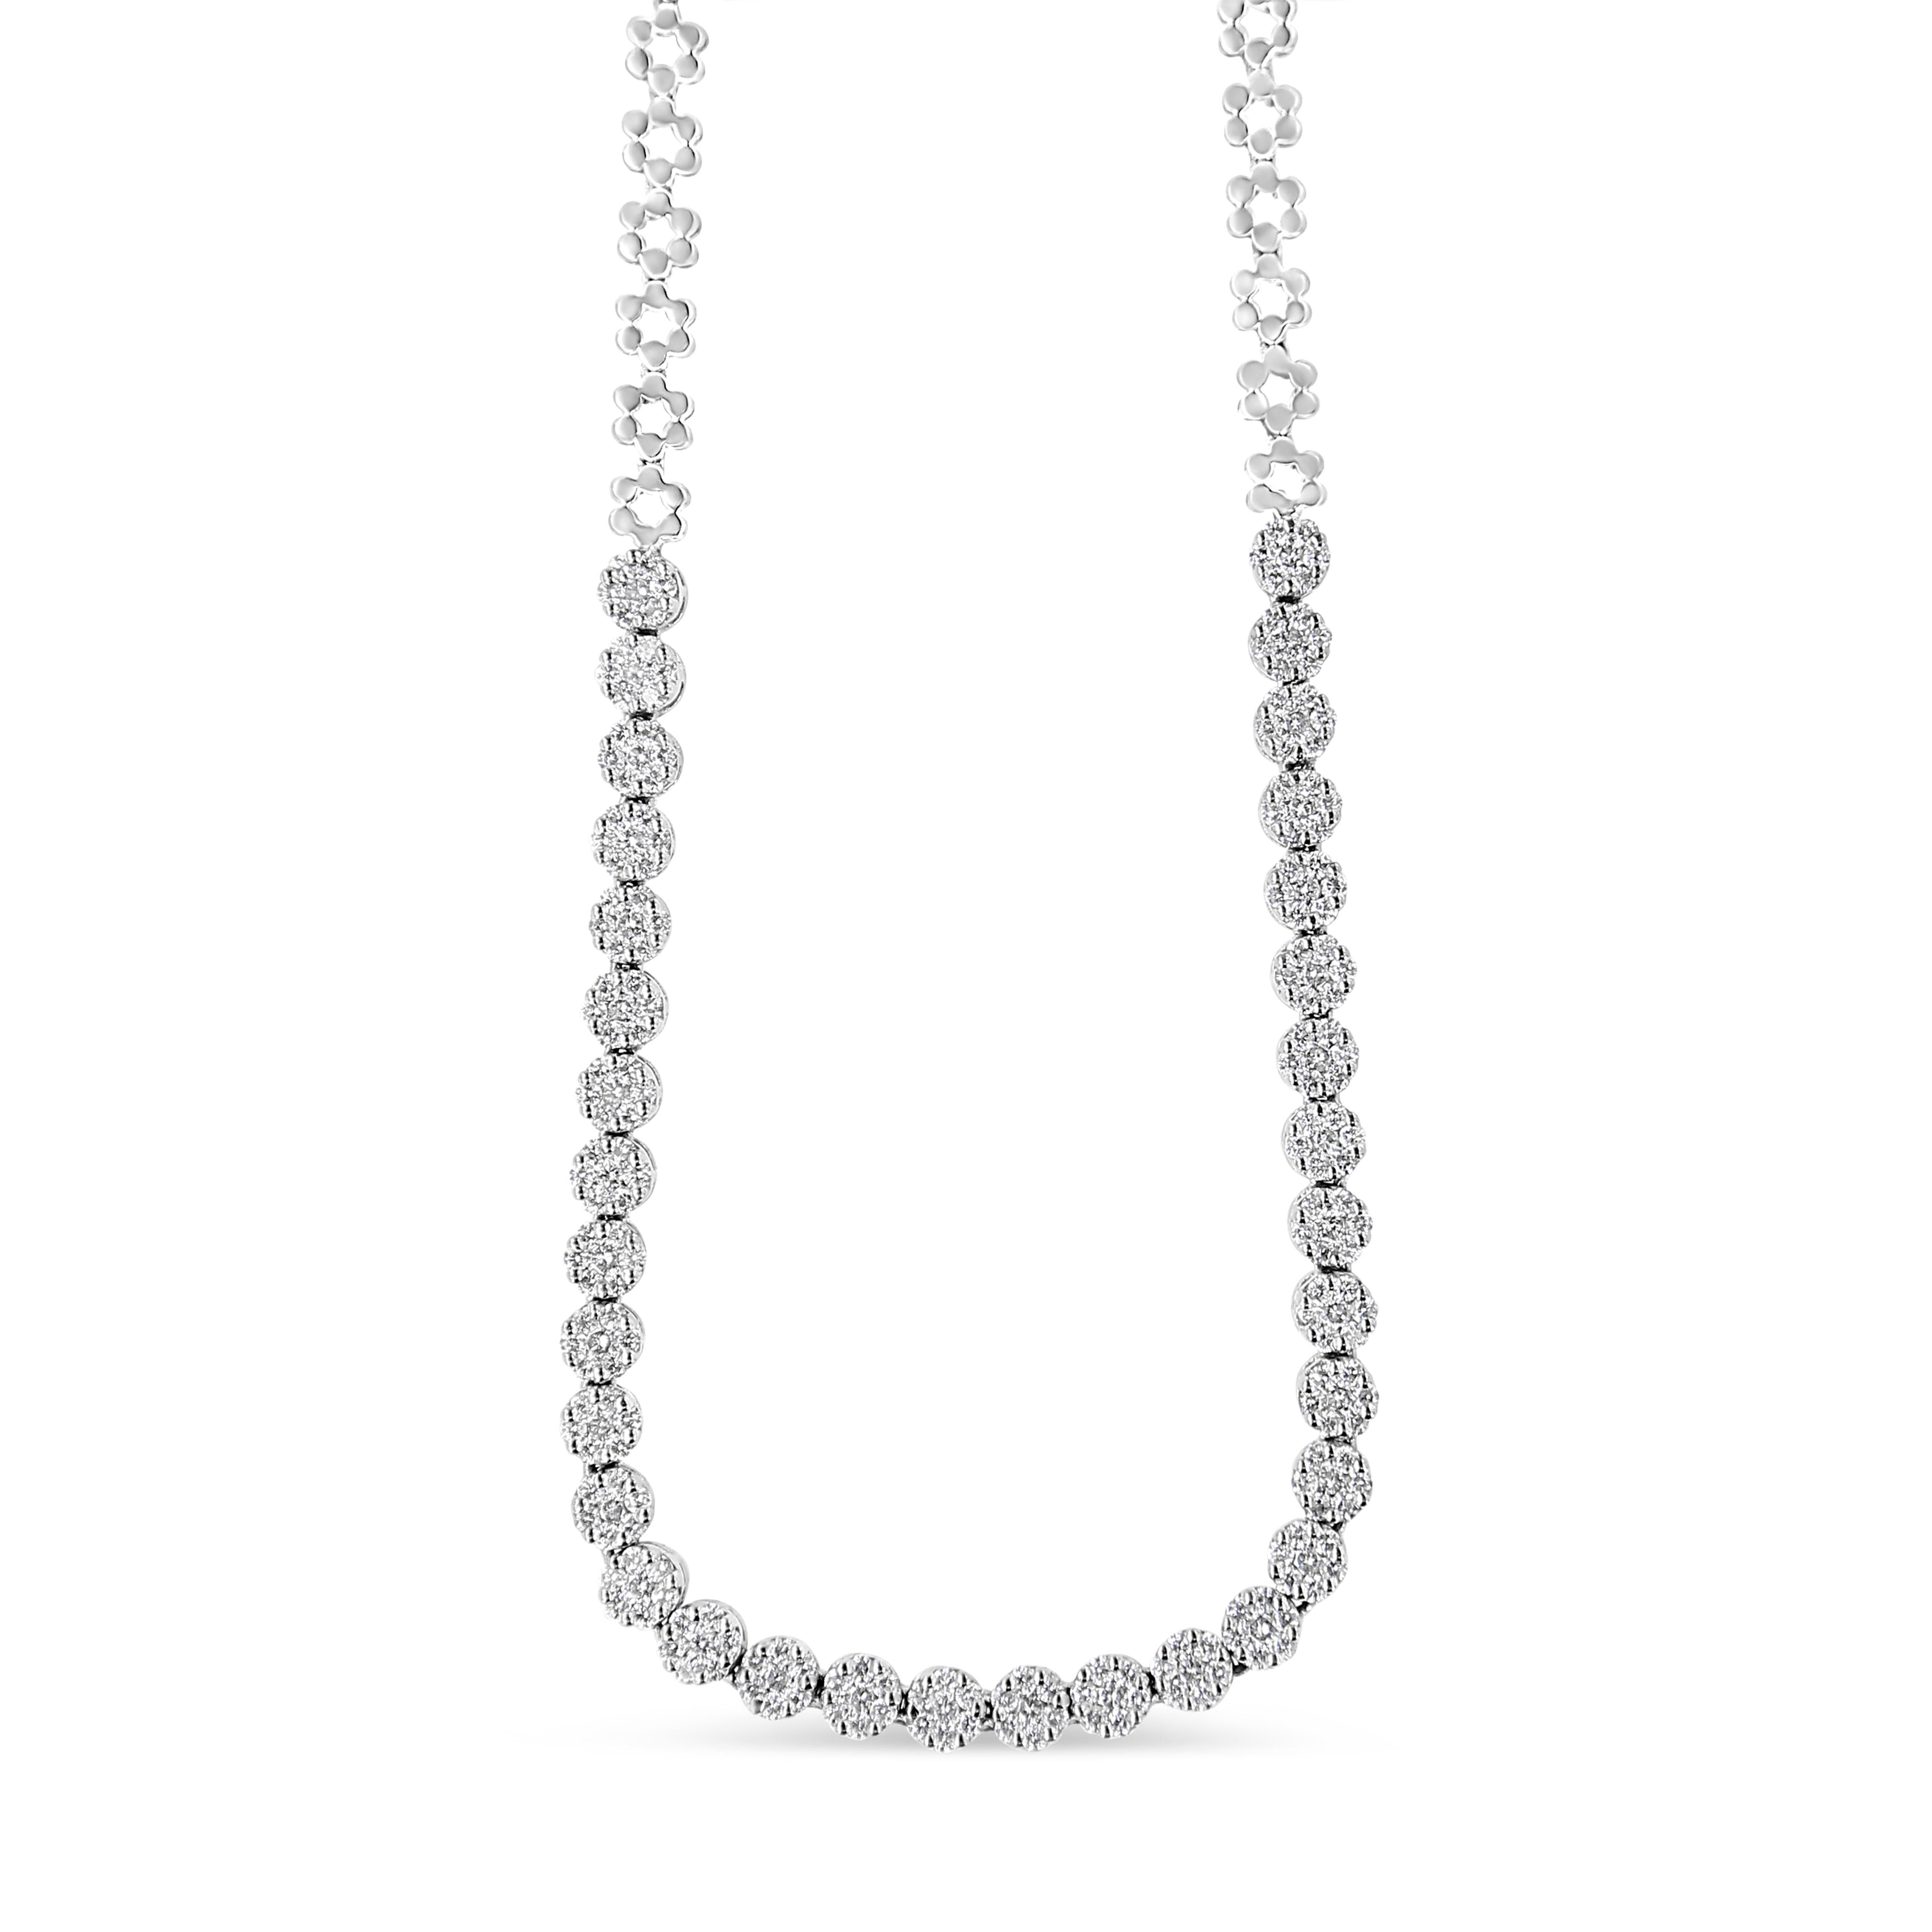 As elegant as it is dramatic, this dazzling Riviera diamond necklace elevates any attire. Expertly crafted in cool weaves of 14K white gold, this eye-catching design features flower-shaped clusters of shimmering round diamonds paired with polished